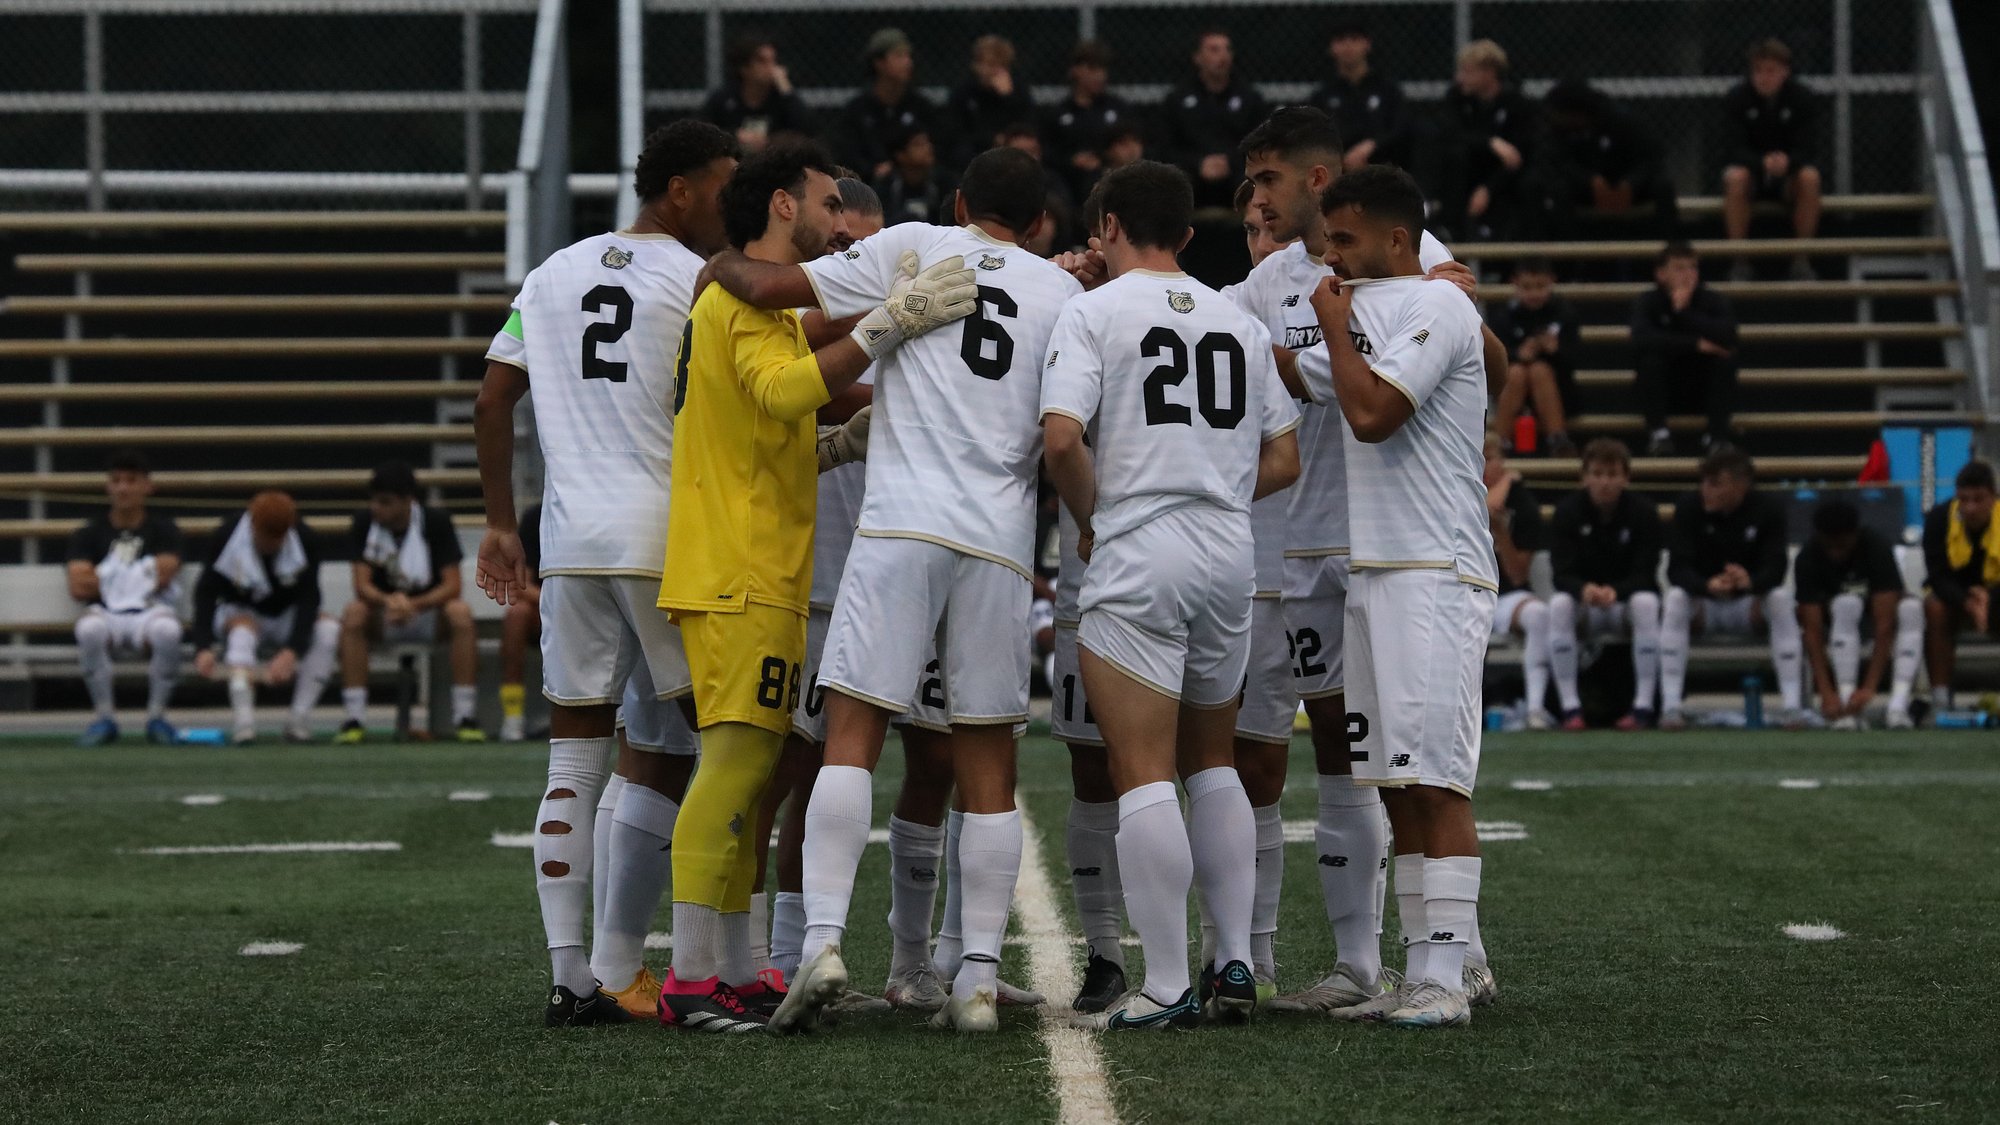 Black and Gold take on Yale in NCAA First Round on Thursday